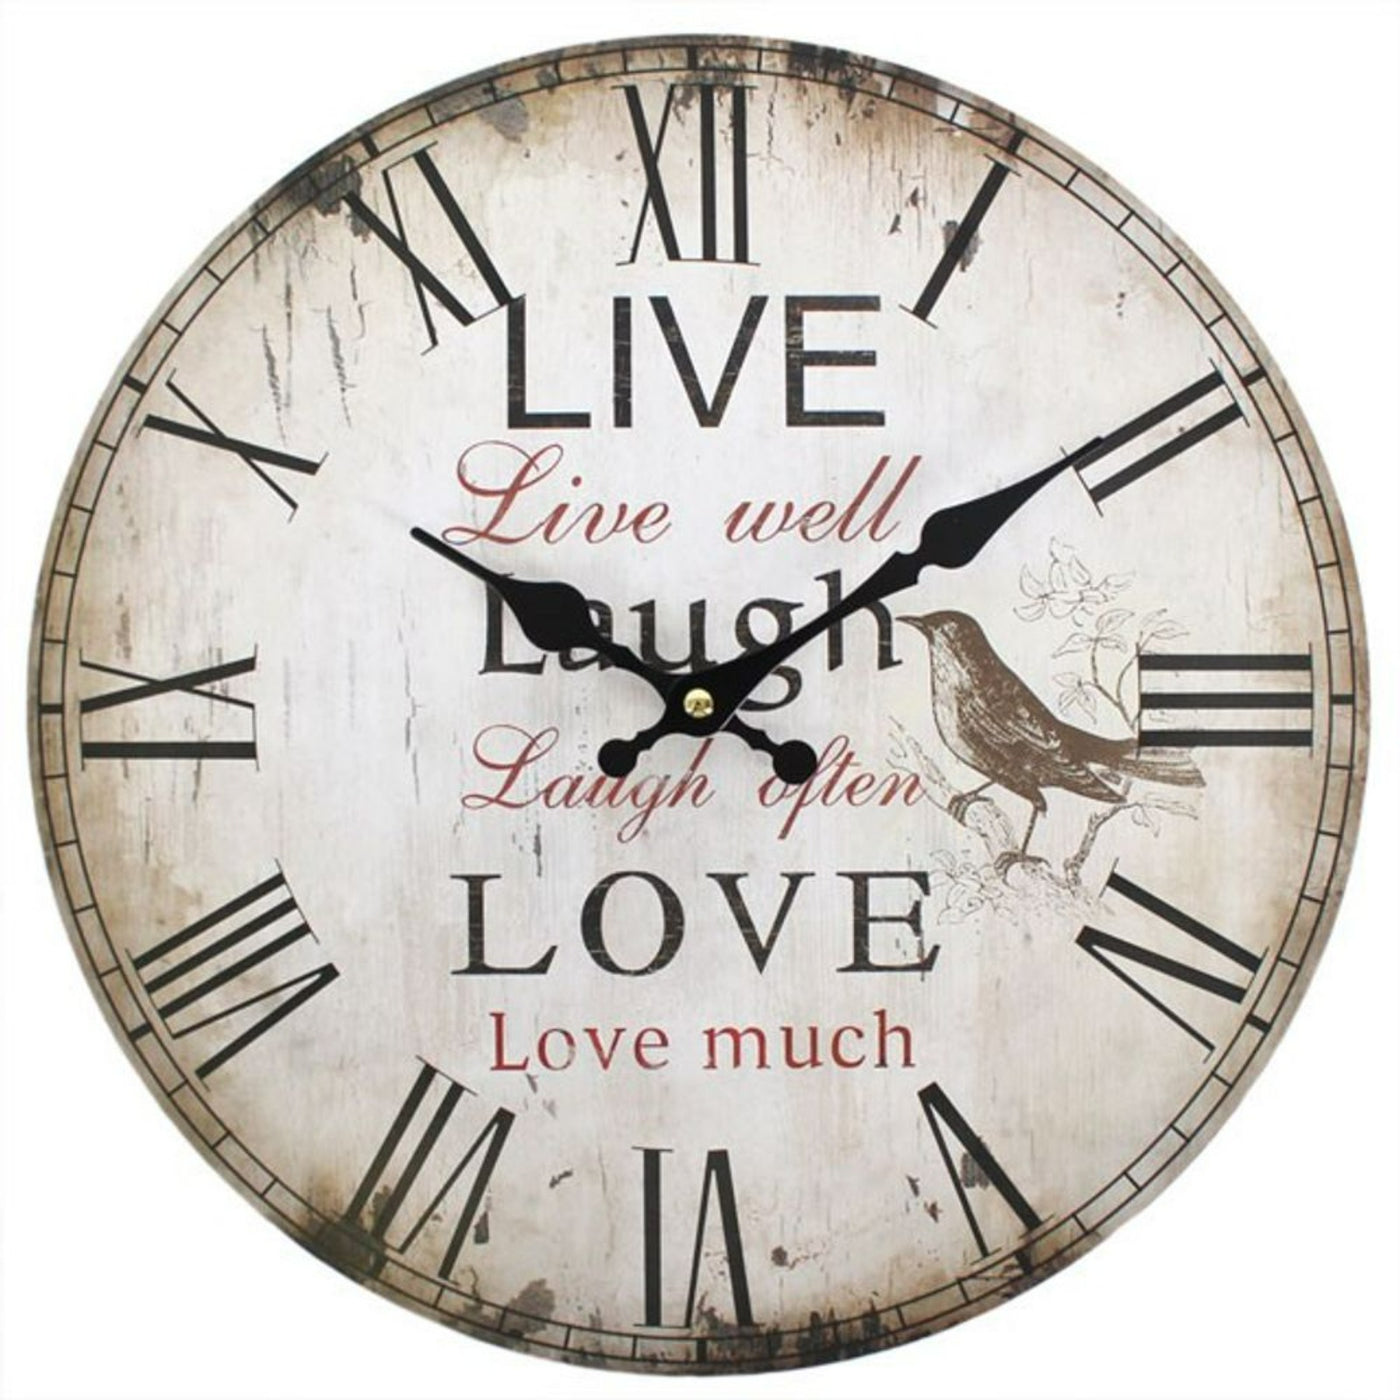 Rustic Effect Live Well, Laugh Often, Love Much Wall Clock.